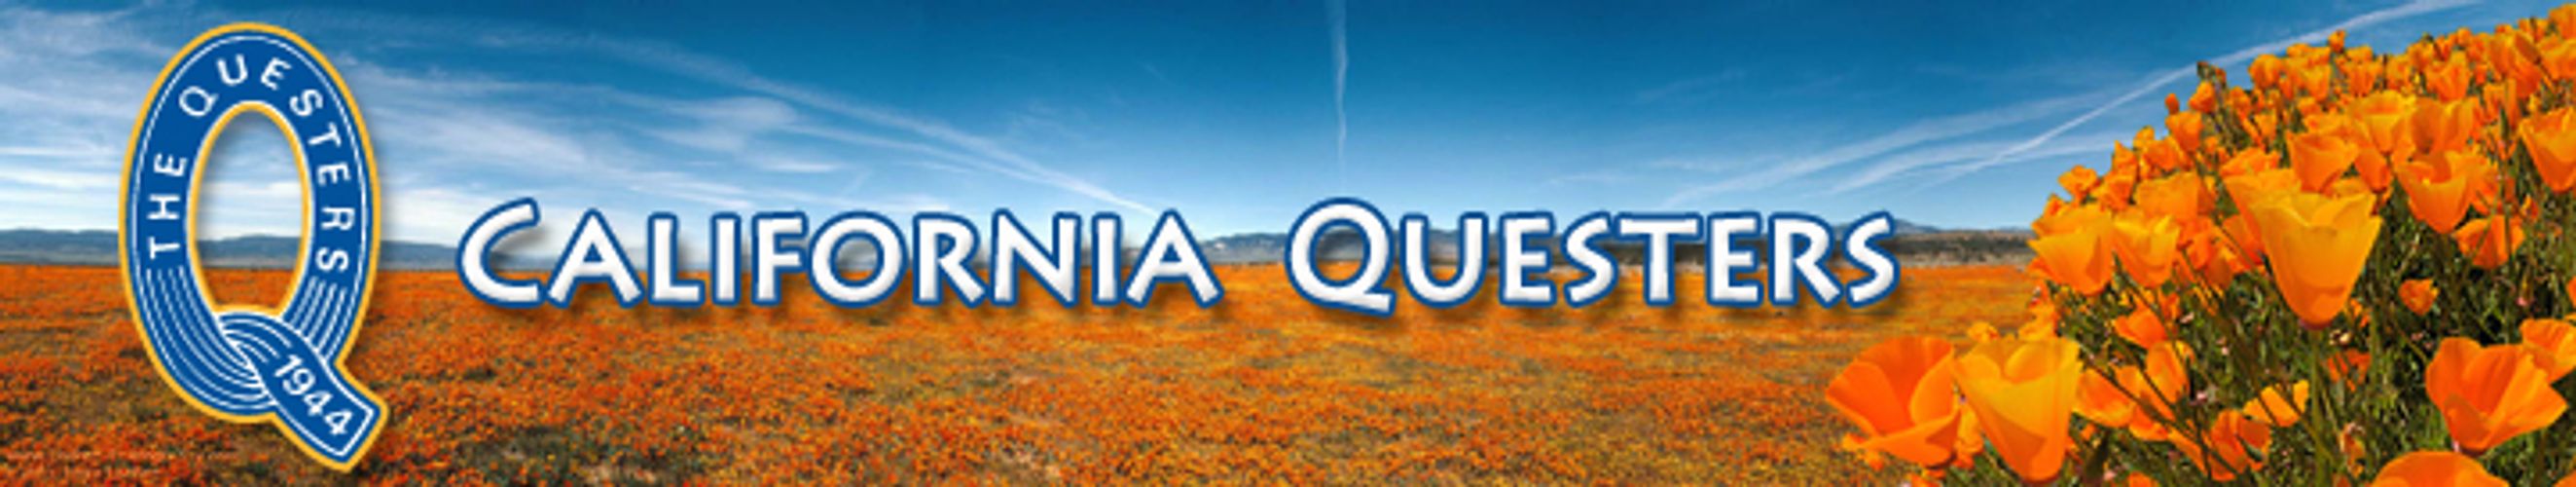 California Questers banner with logo and photo of poppies